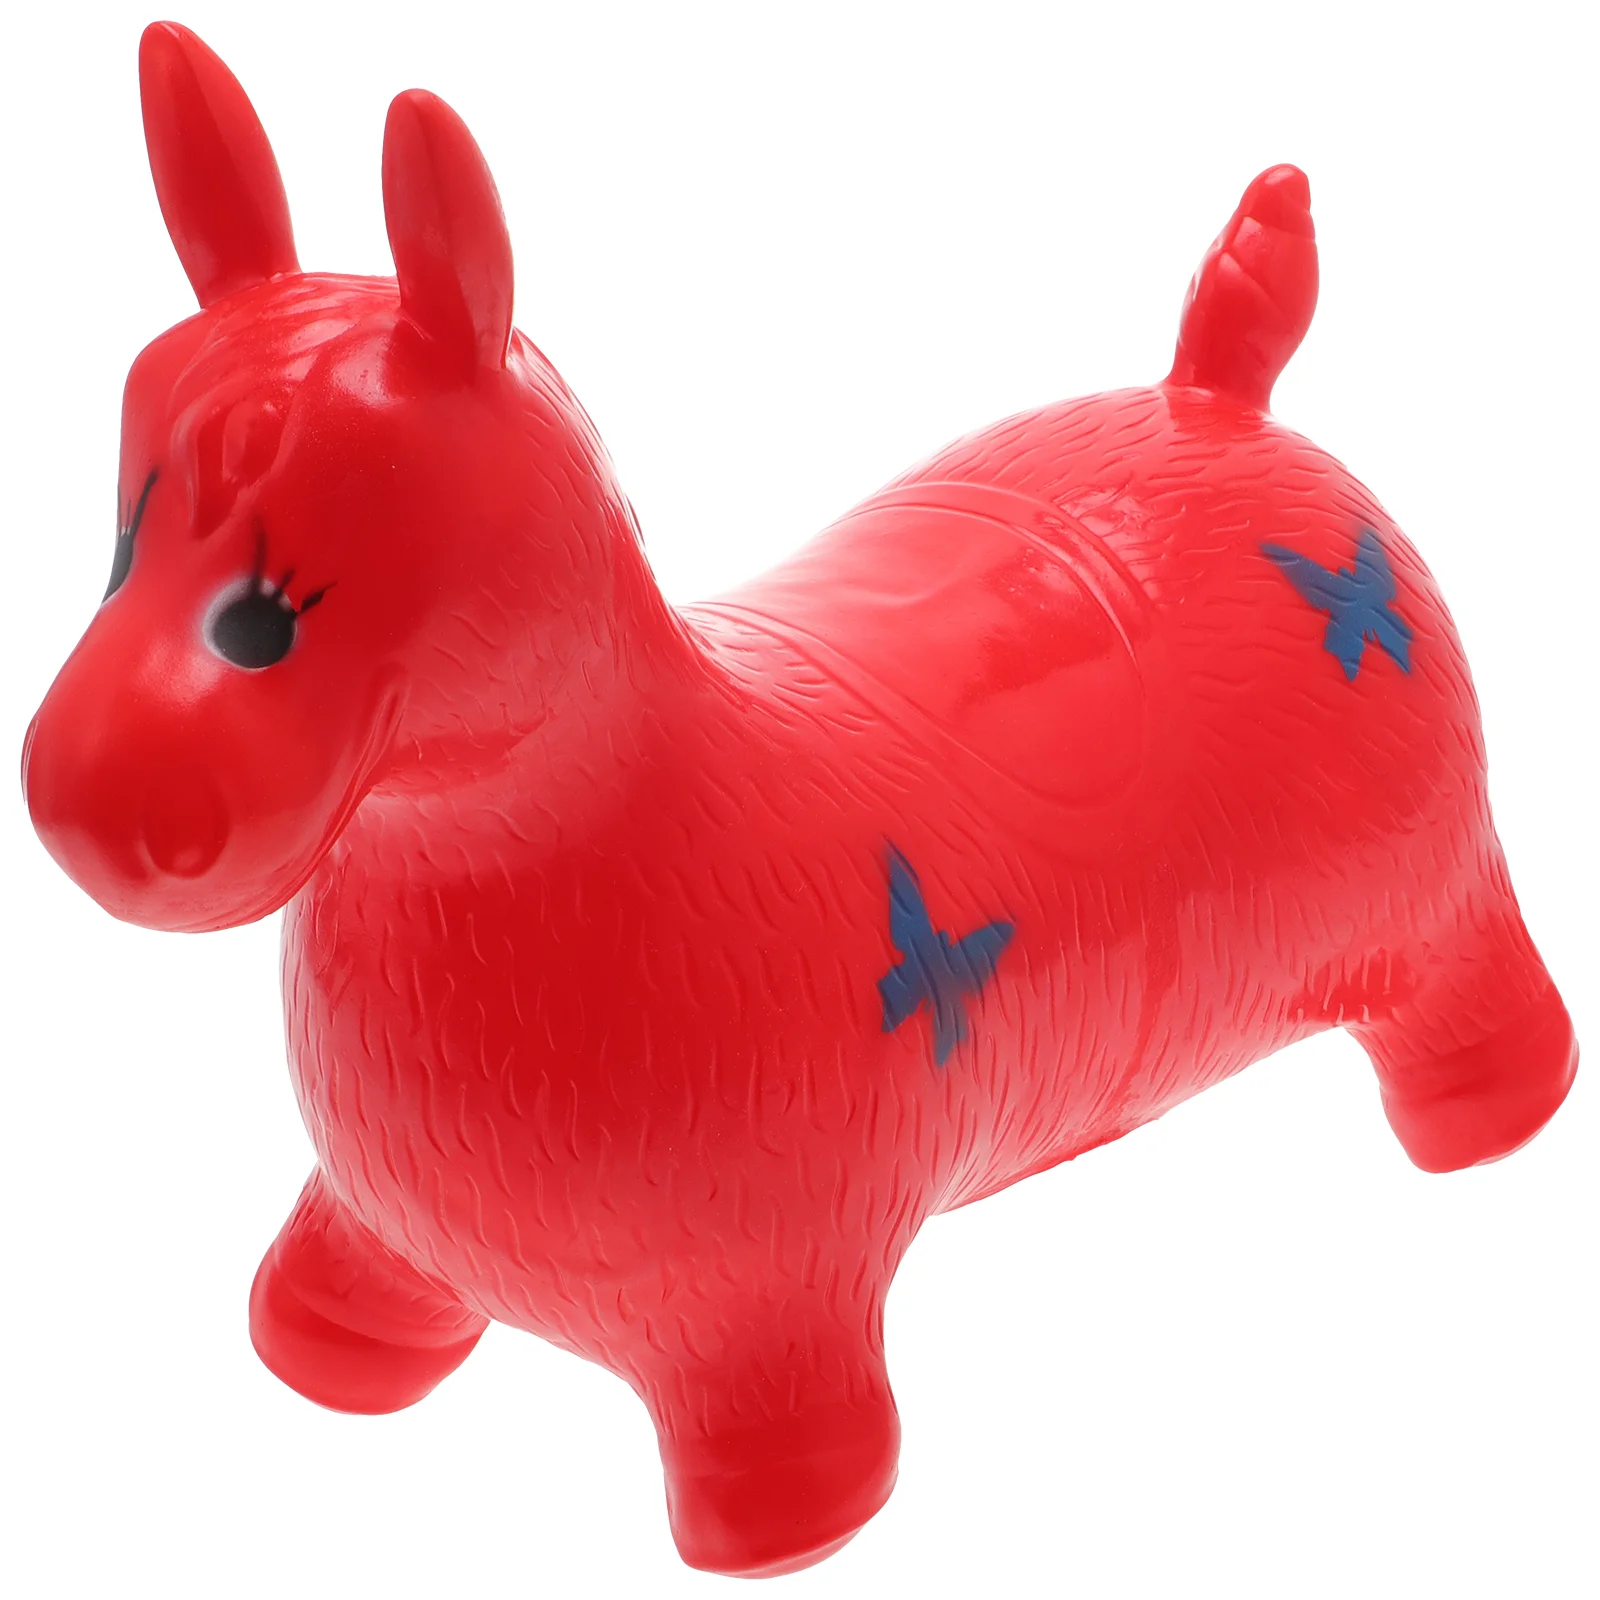 

Creative Kids Inflatable Jumping Horse Toy with Music Ideal for Physical Development and Birthday Gifts